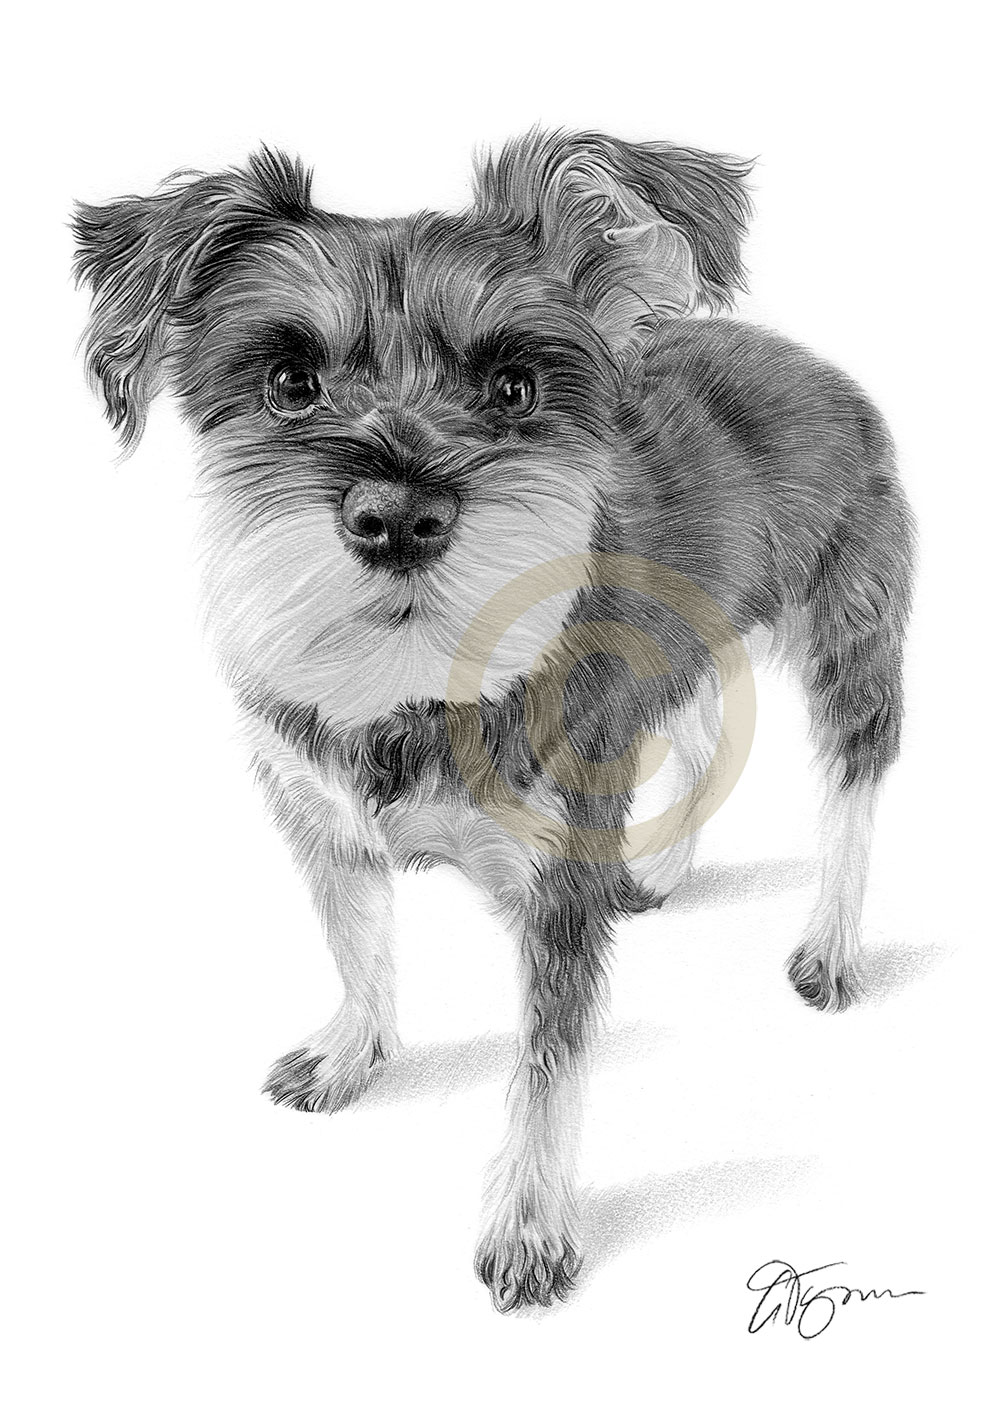 Pencil drawing commission of a schnauzer puppy by artist Gary Tymon